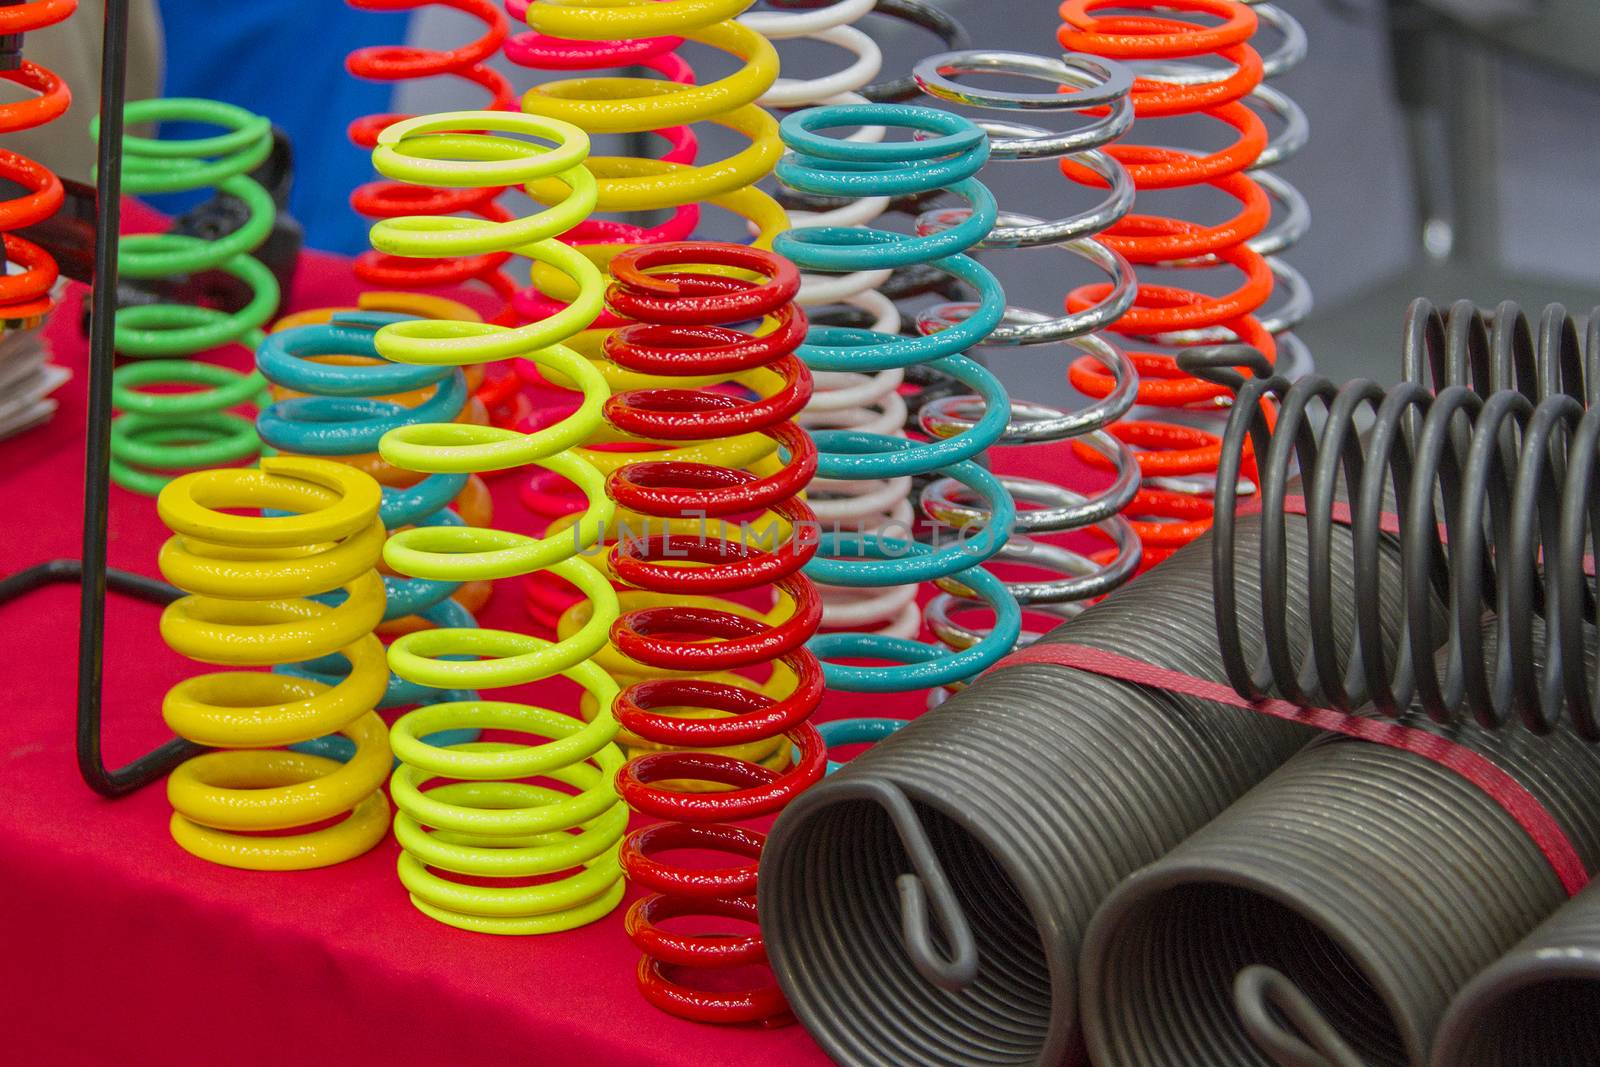 Coil springs are many colors on the red table. by TakerWalker